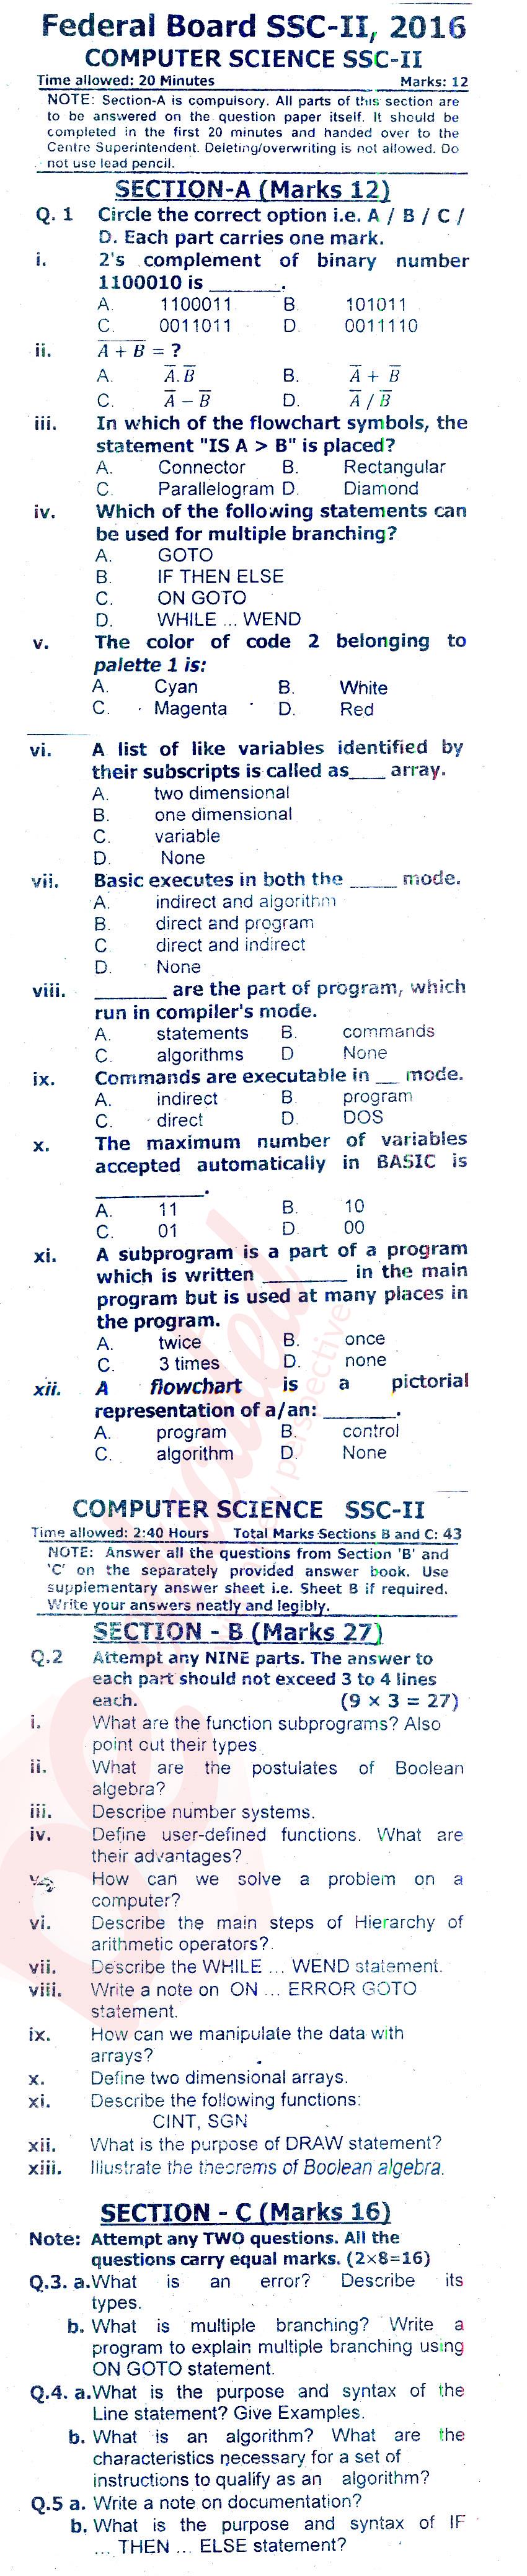 Computer Science 10th class Past Paper Group 1 Federal BISE  2016